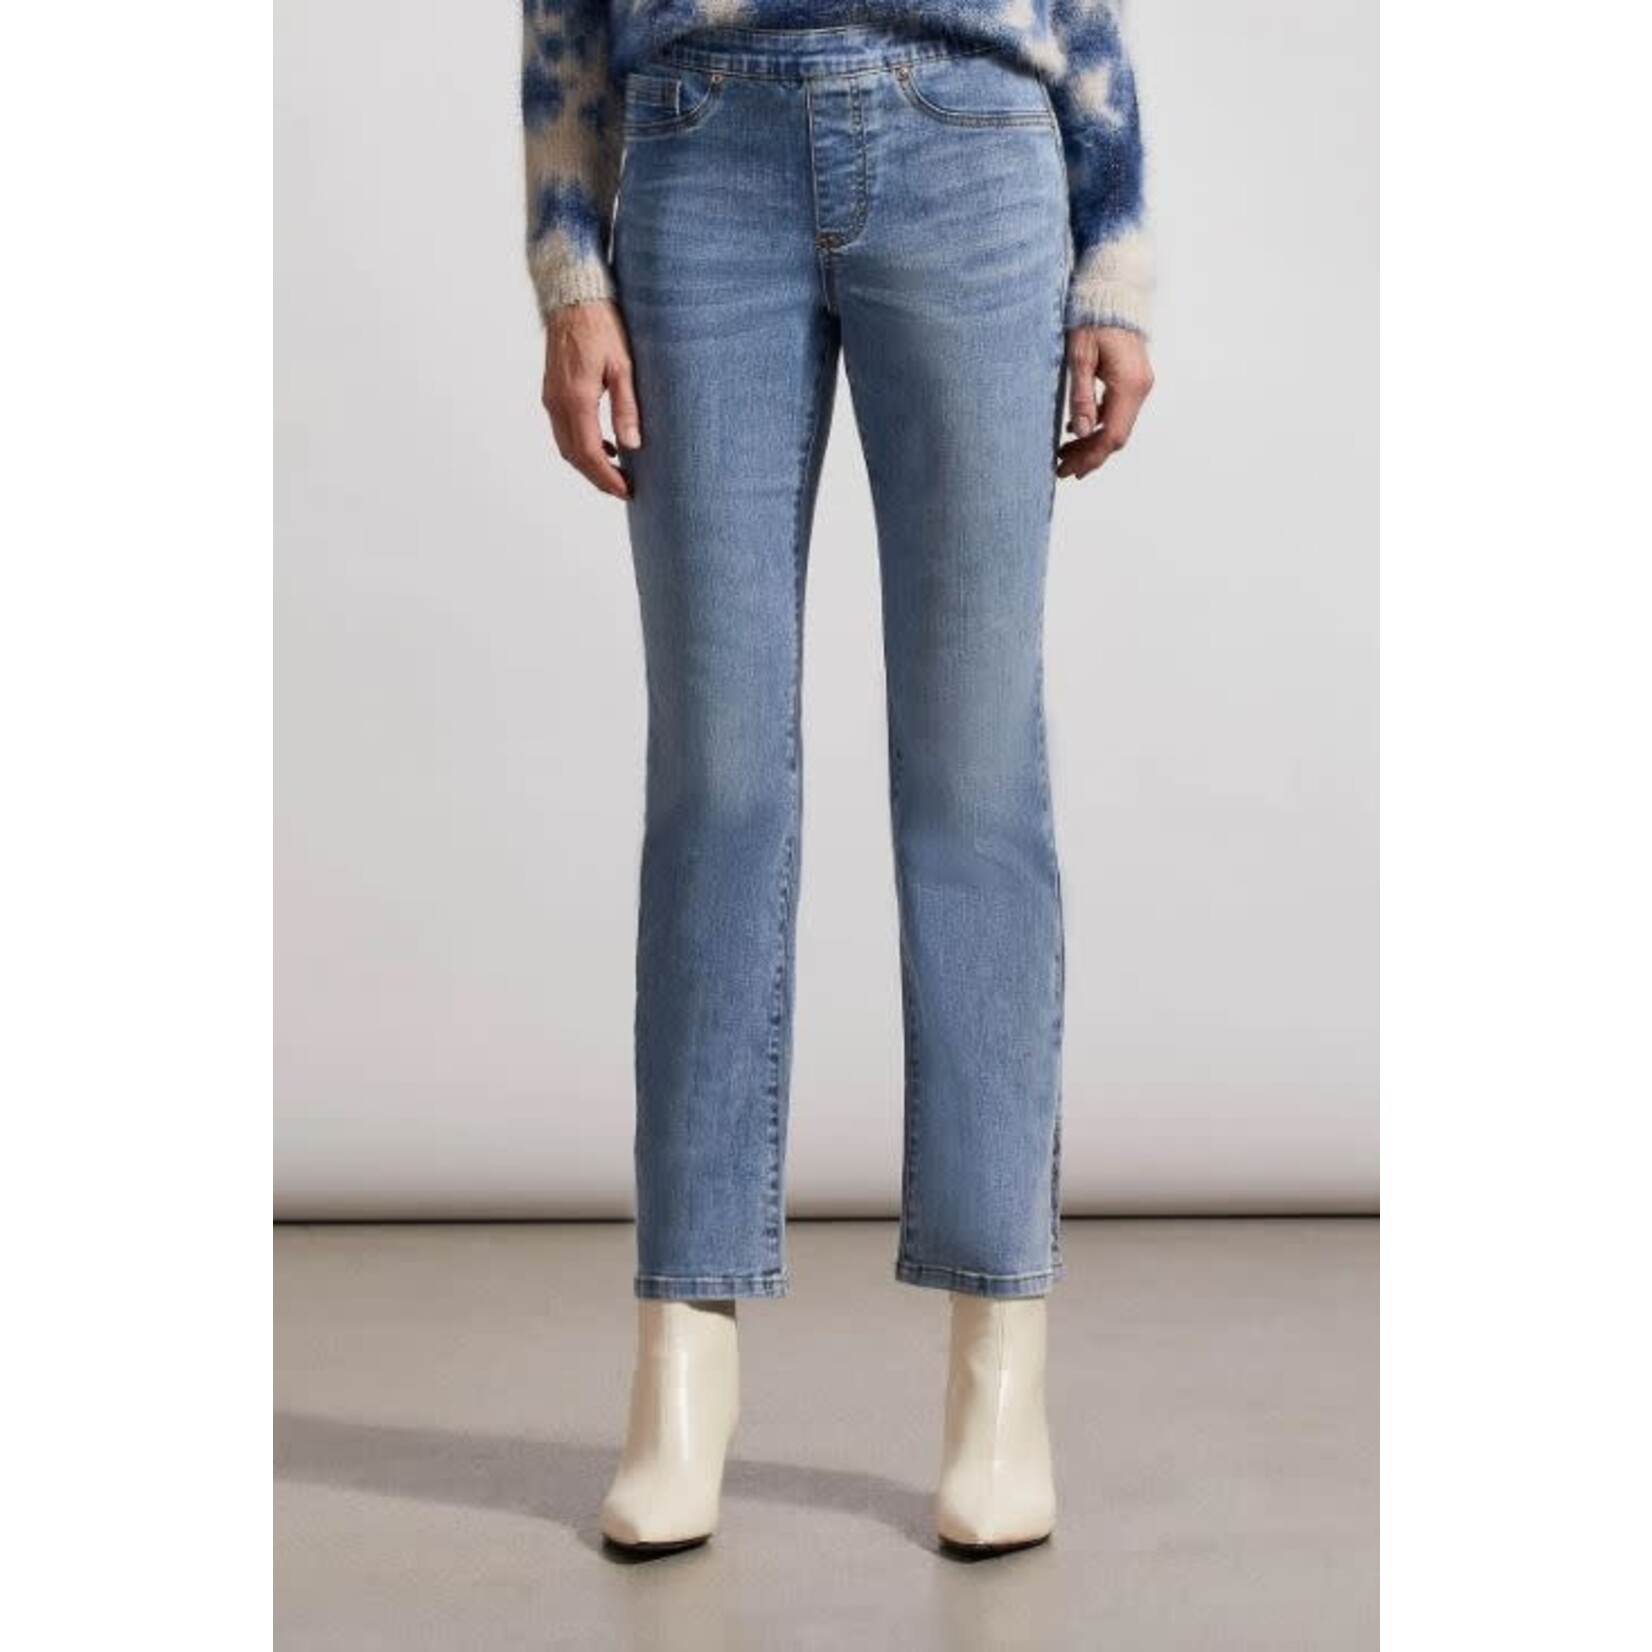 Tribal Audrey Pull On Microflare Jeans